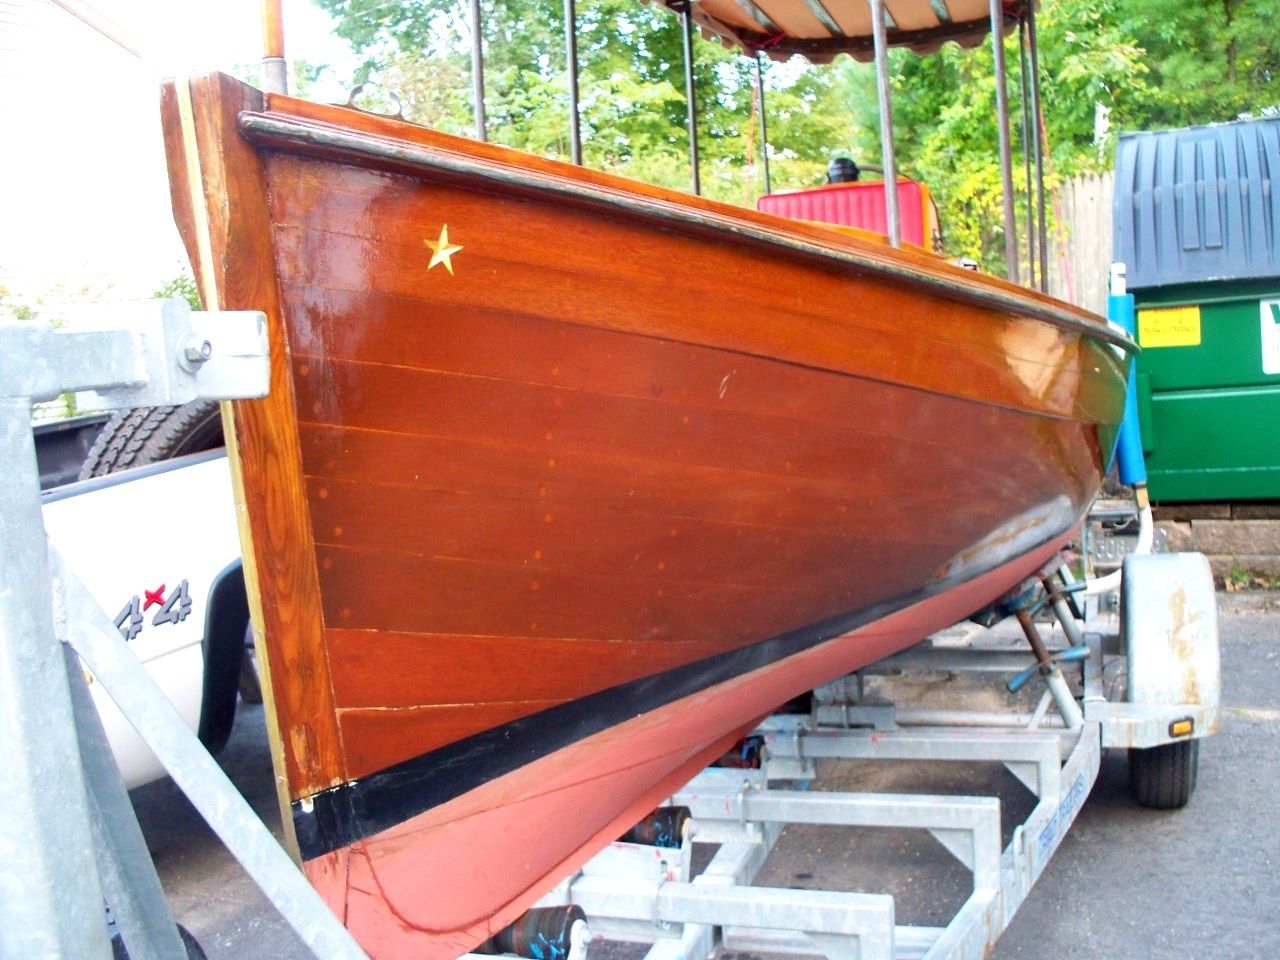 Joseph Crosby Fantail Launch 1983 for sale for $20,000 